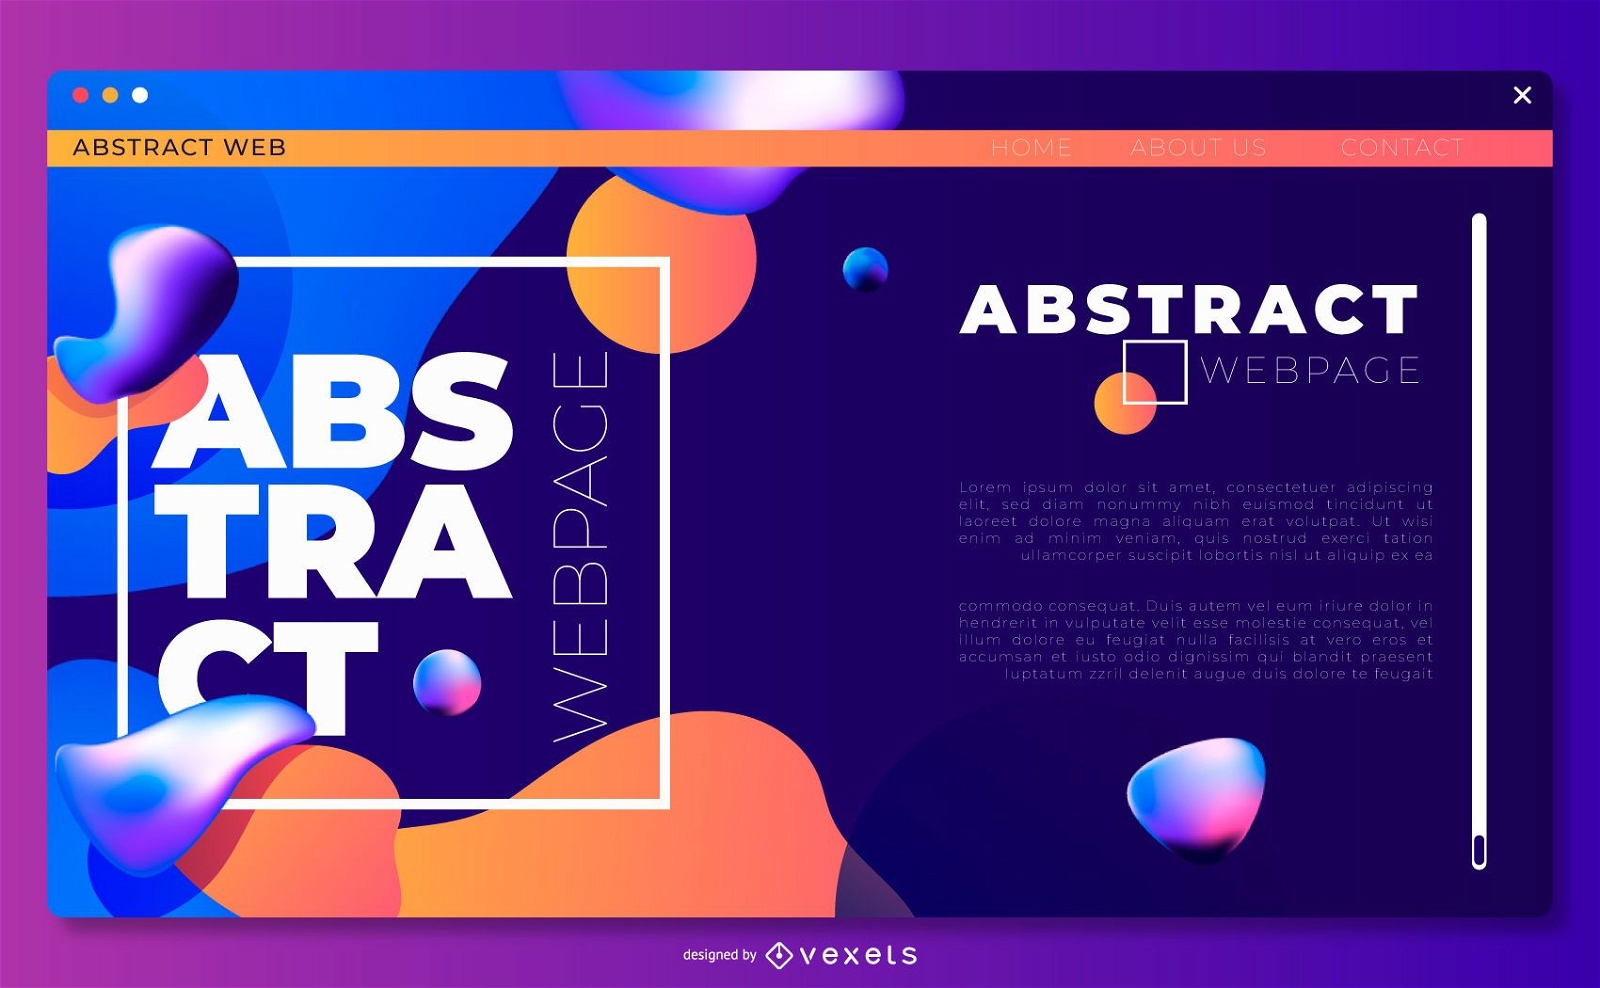 Abstract landing page template